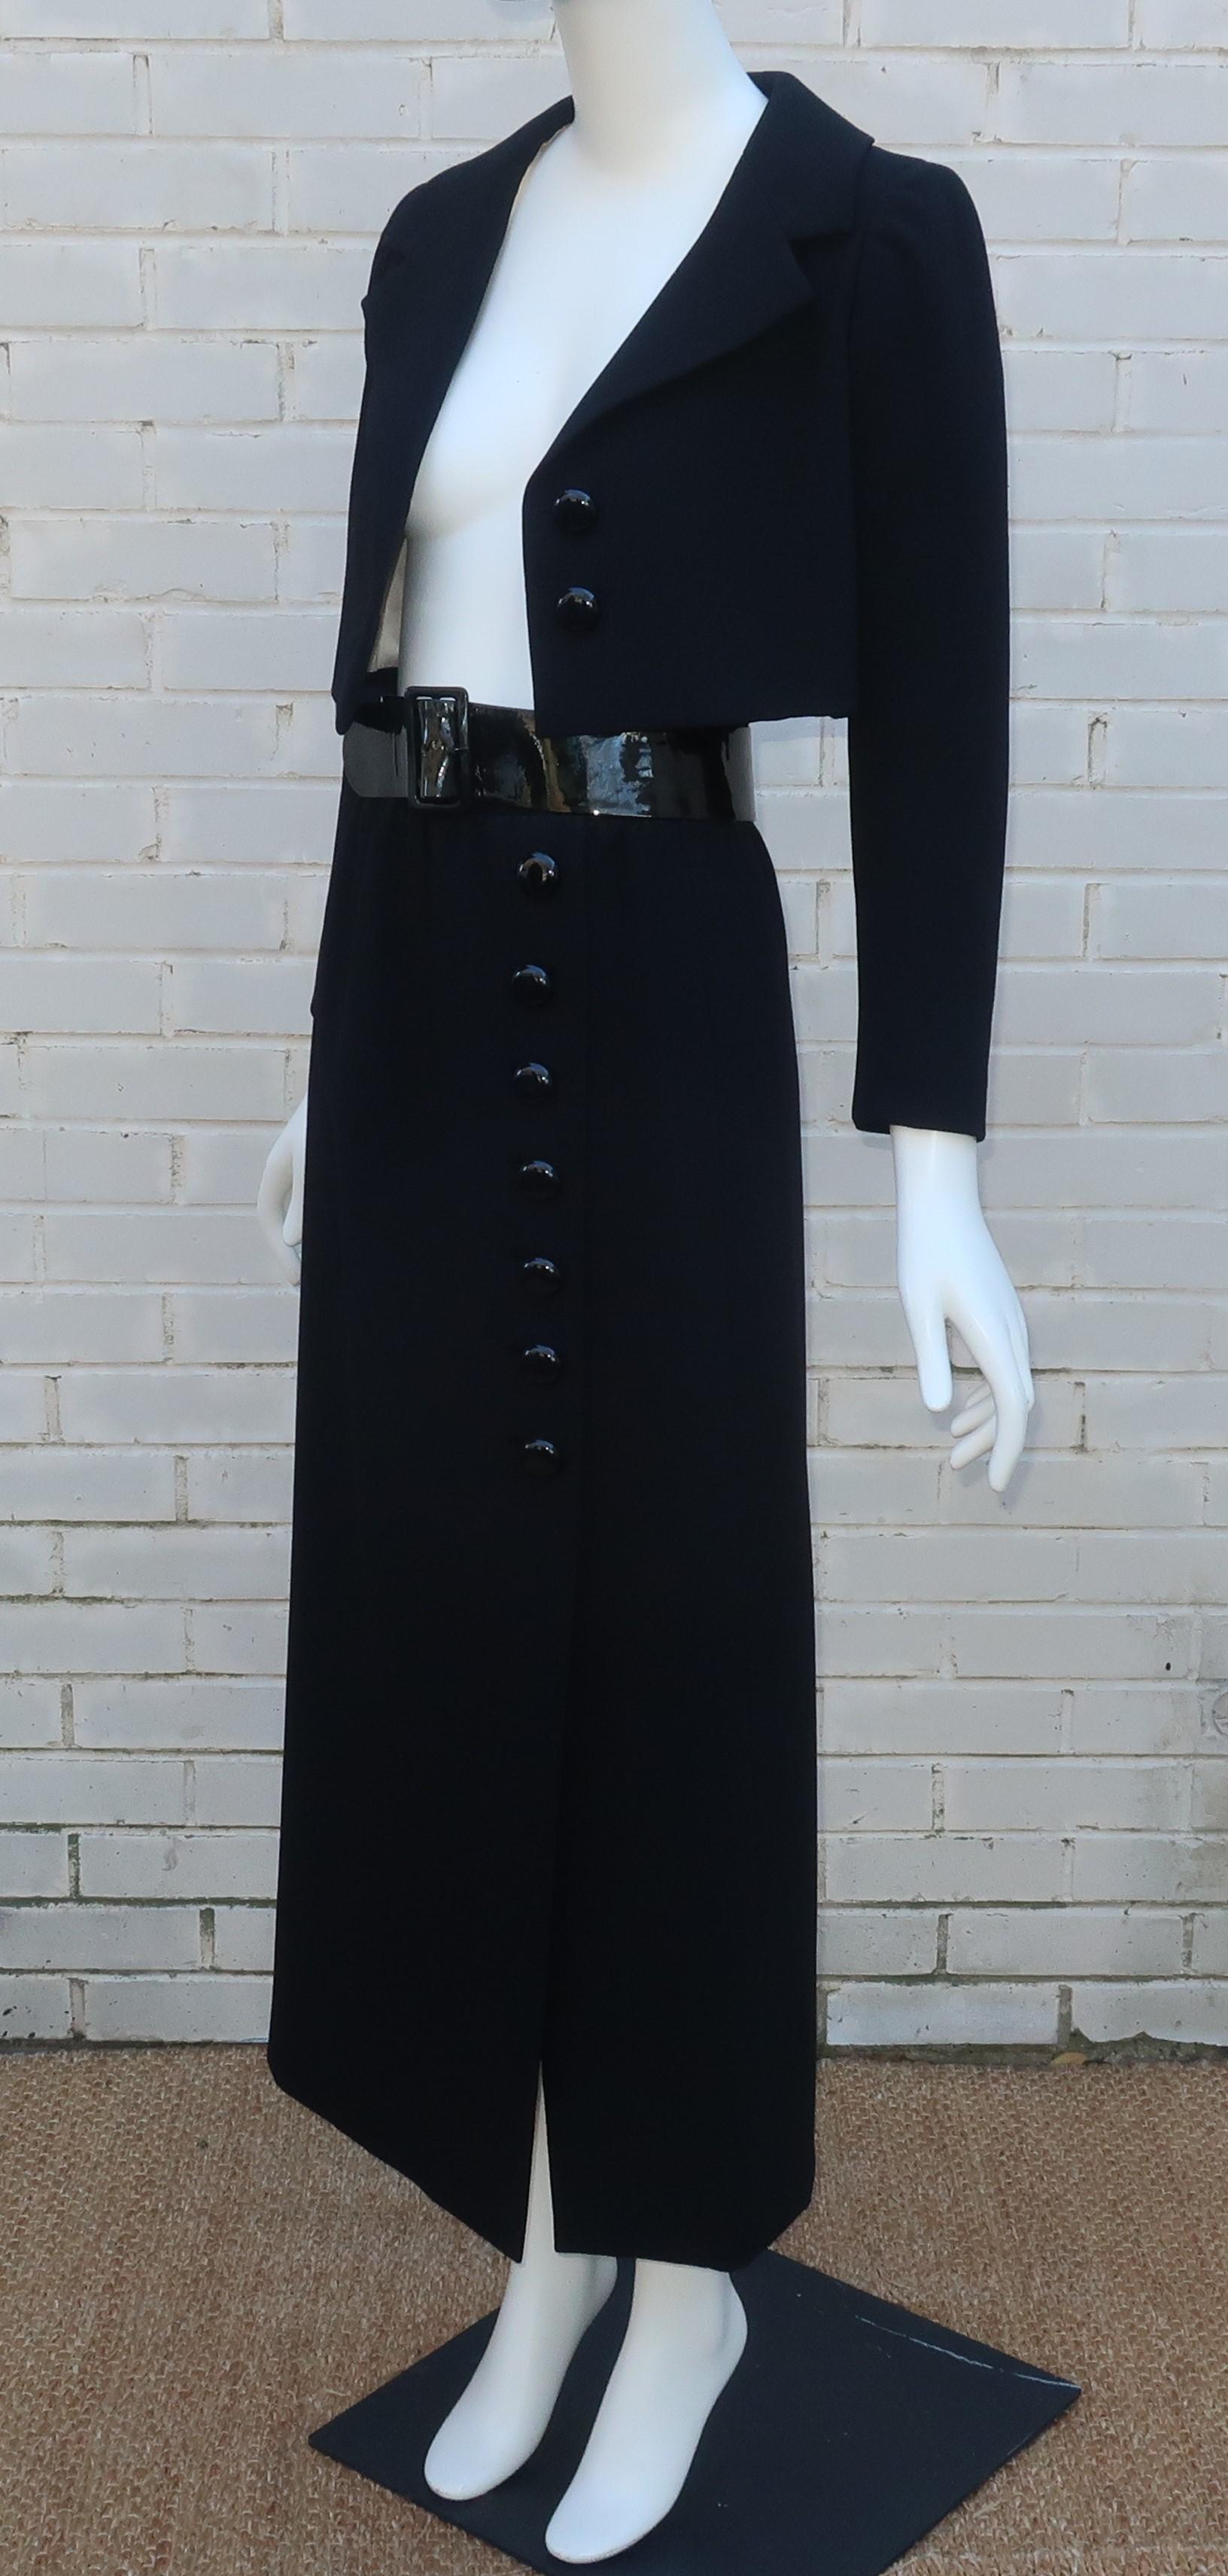 Norman Norell Belted Maxi Skirt Evening Suit With Cropped Jacket, 1968 For Sale 4